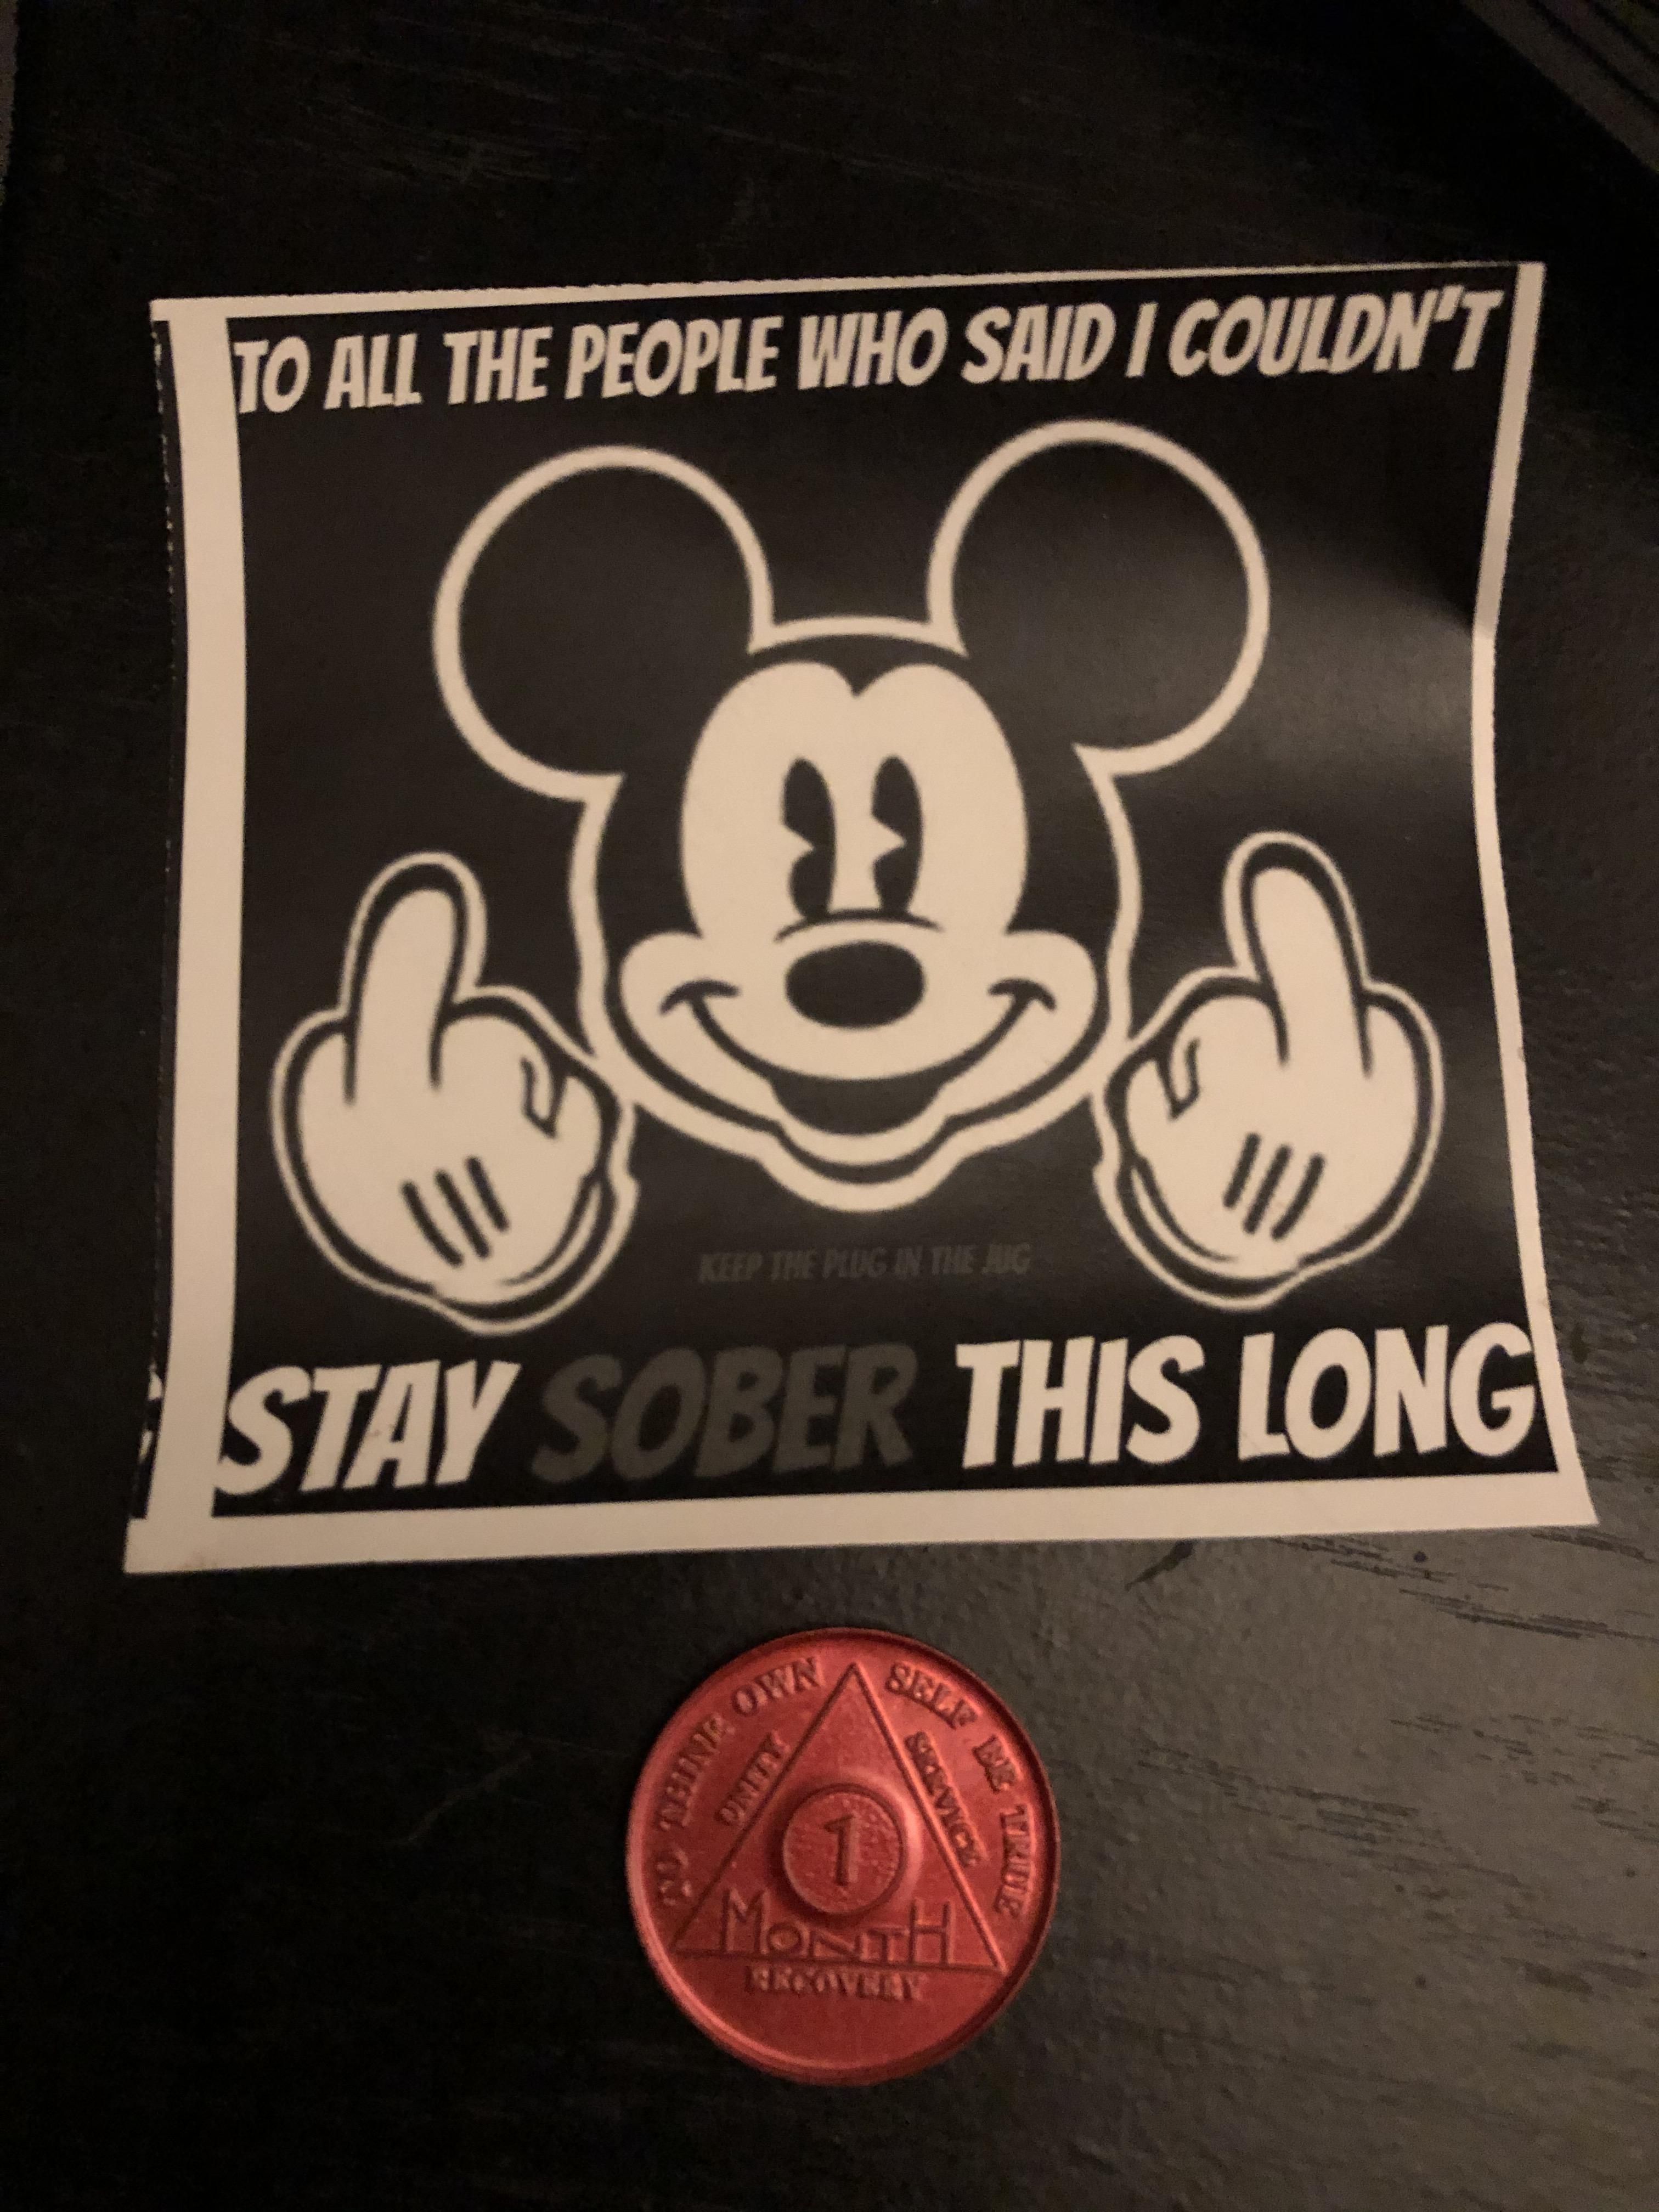 I decided to get sober during the quarantine. My 30 day chip arrived today with this message